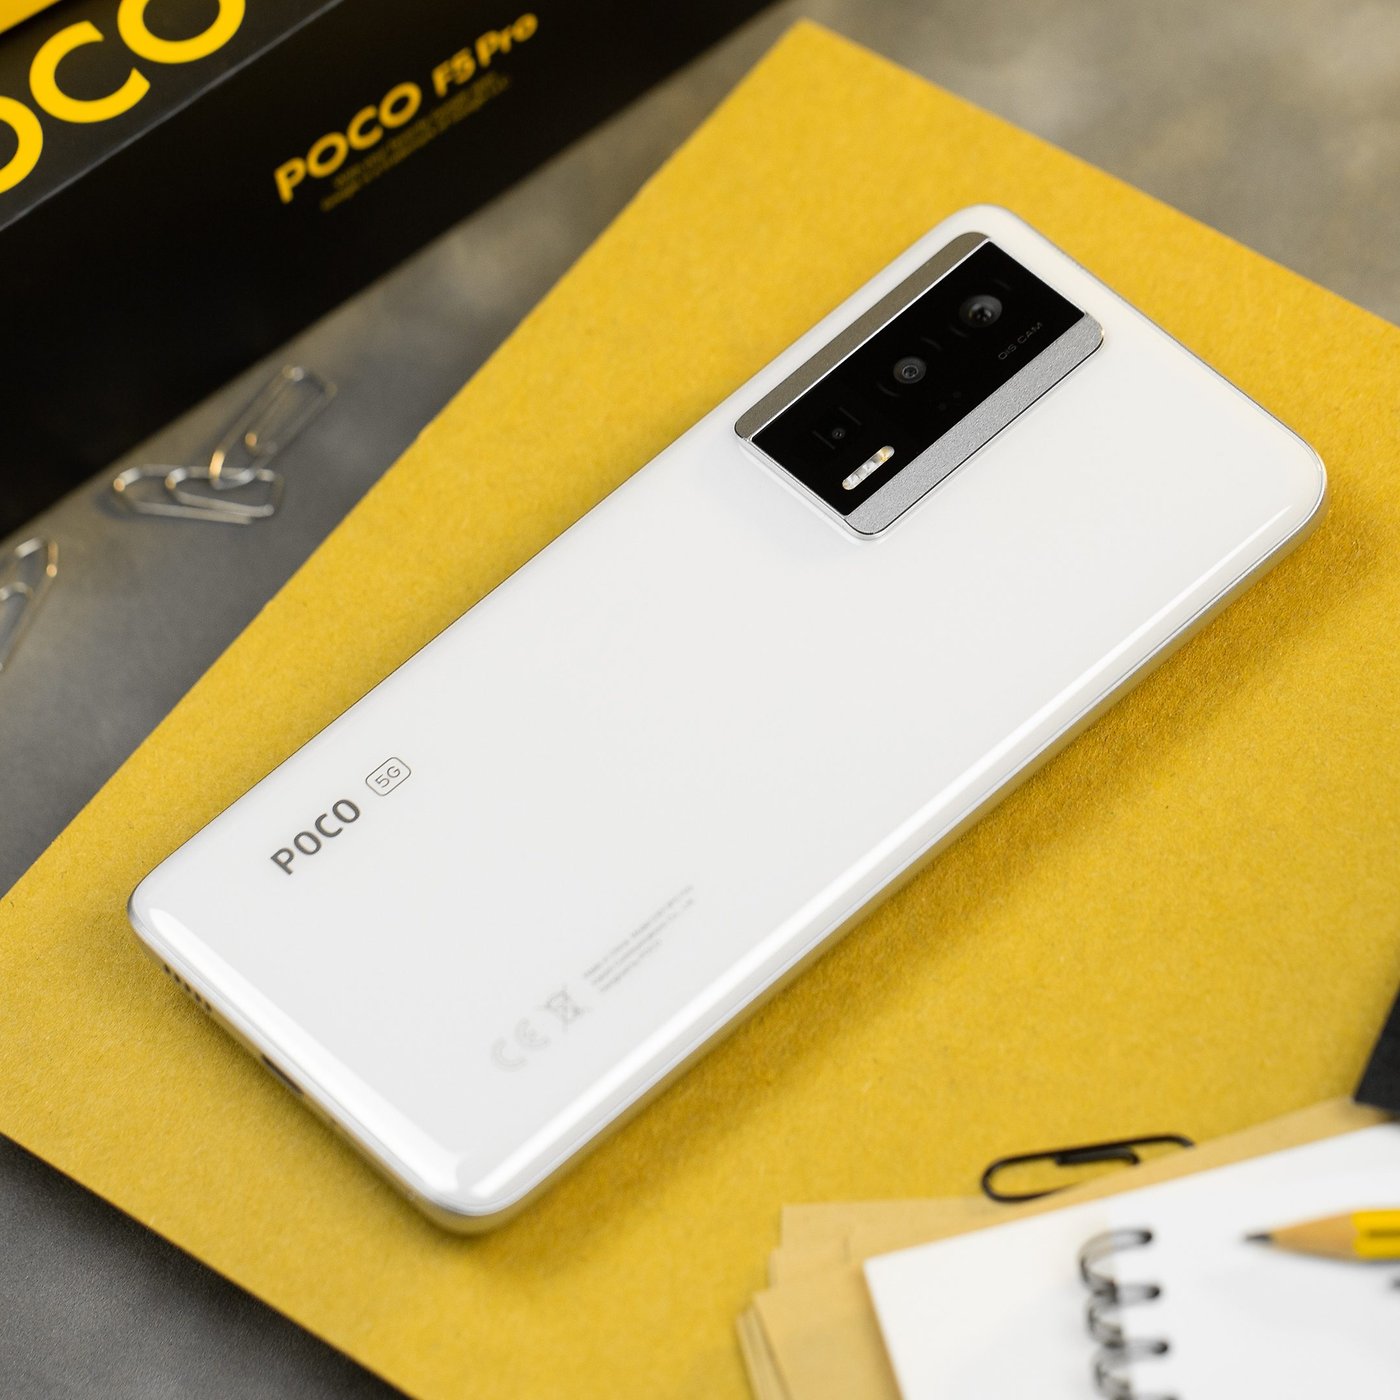 Xiaomi poco f5: The powerhouse Smartphone for Tech Enthusiasts., by lloyd